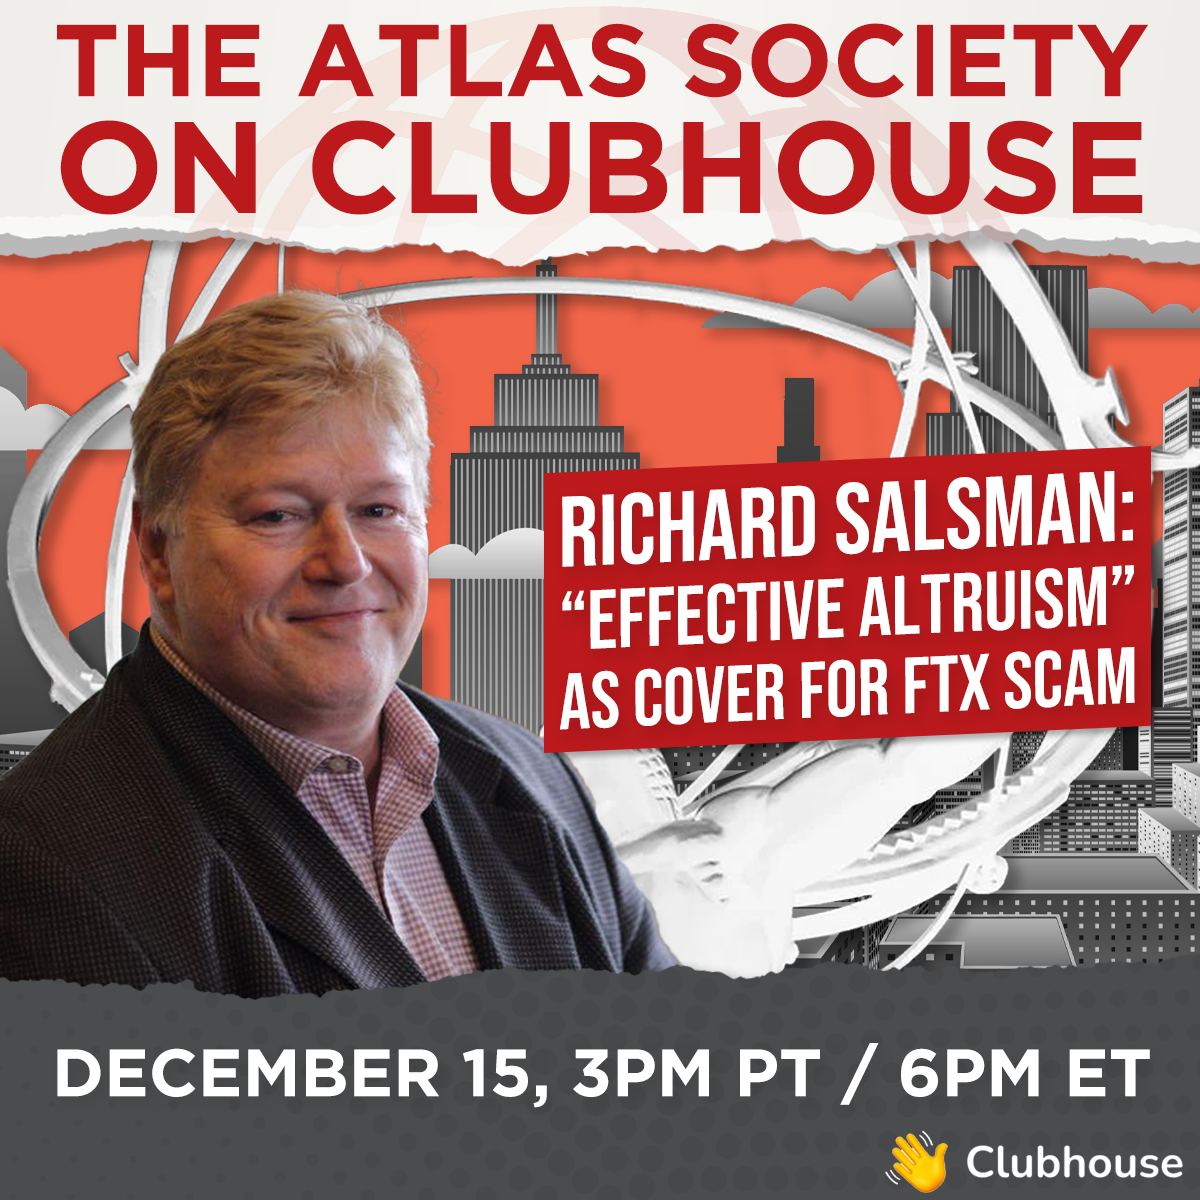 Richard Salsman - "Effective Altruism" as a Cover for the FTX Scam